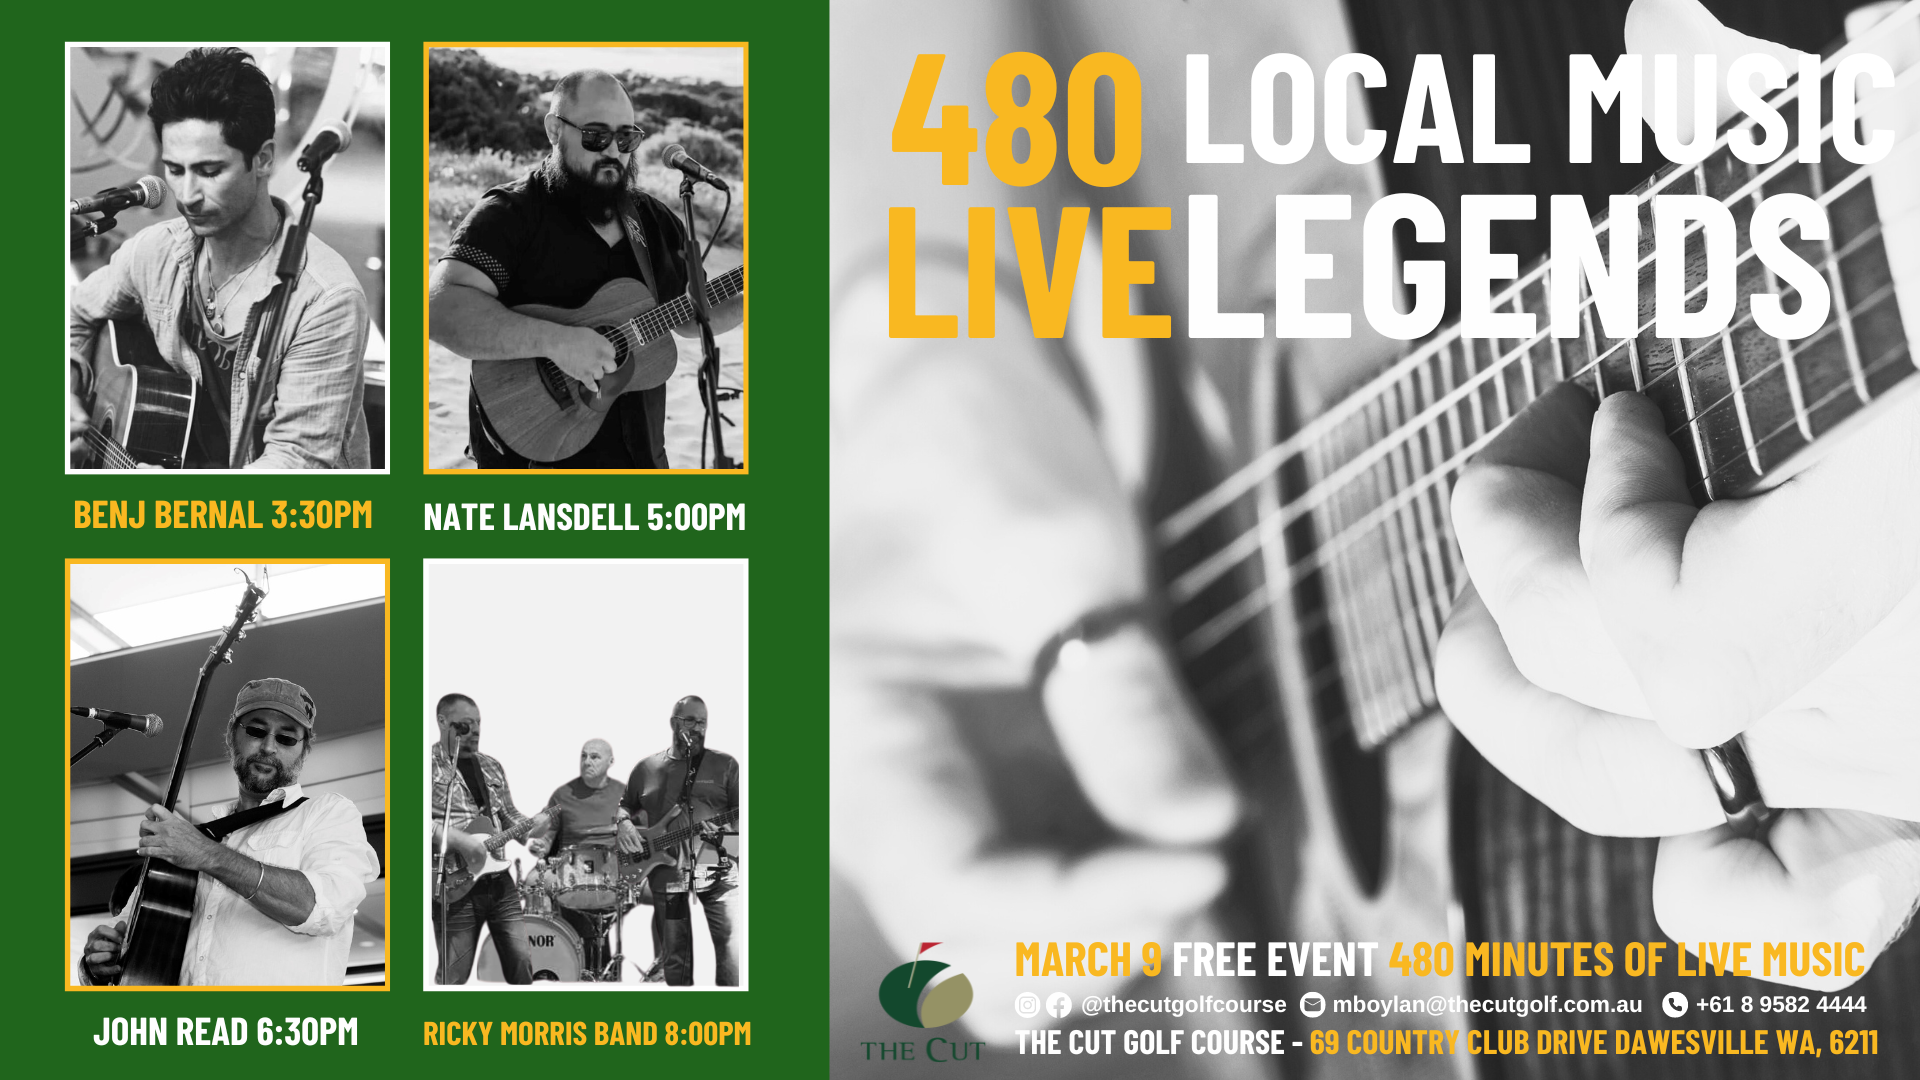 MARCH 9 FREE EVENT 480 MINUTES OF LIVE MUSIC